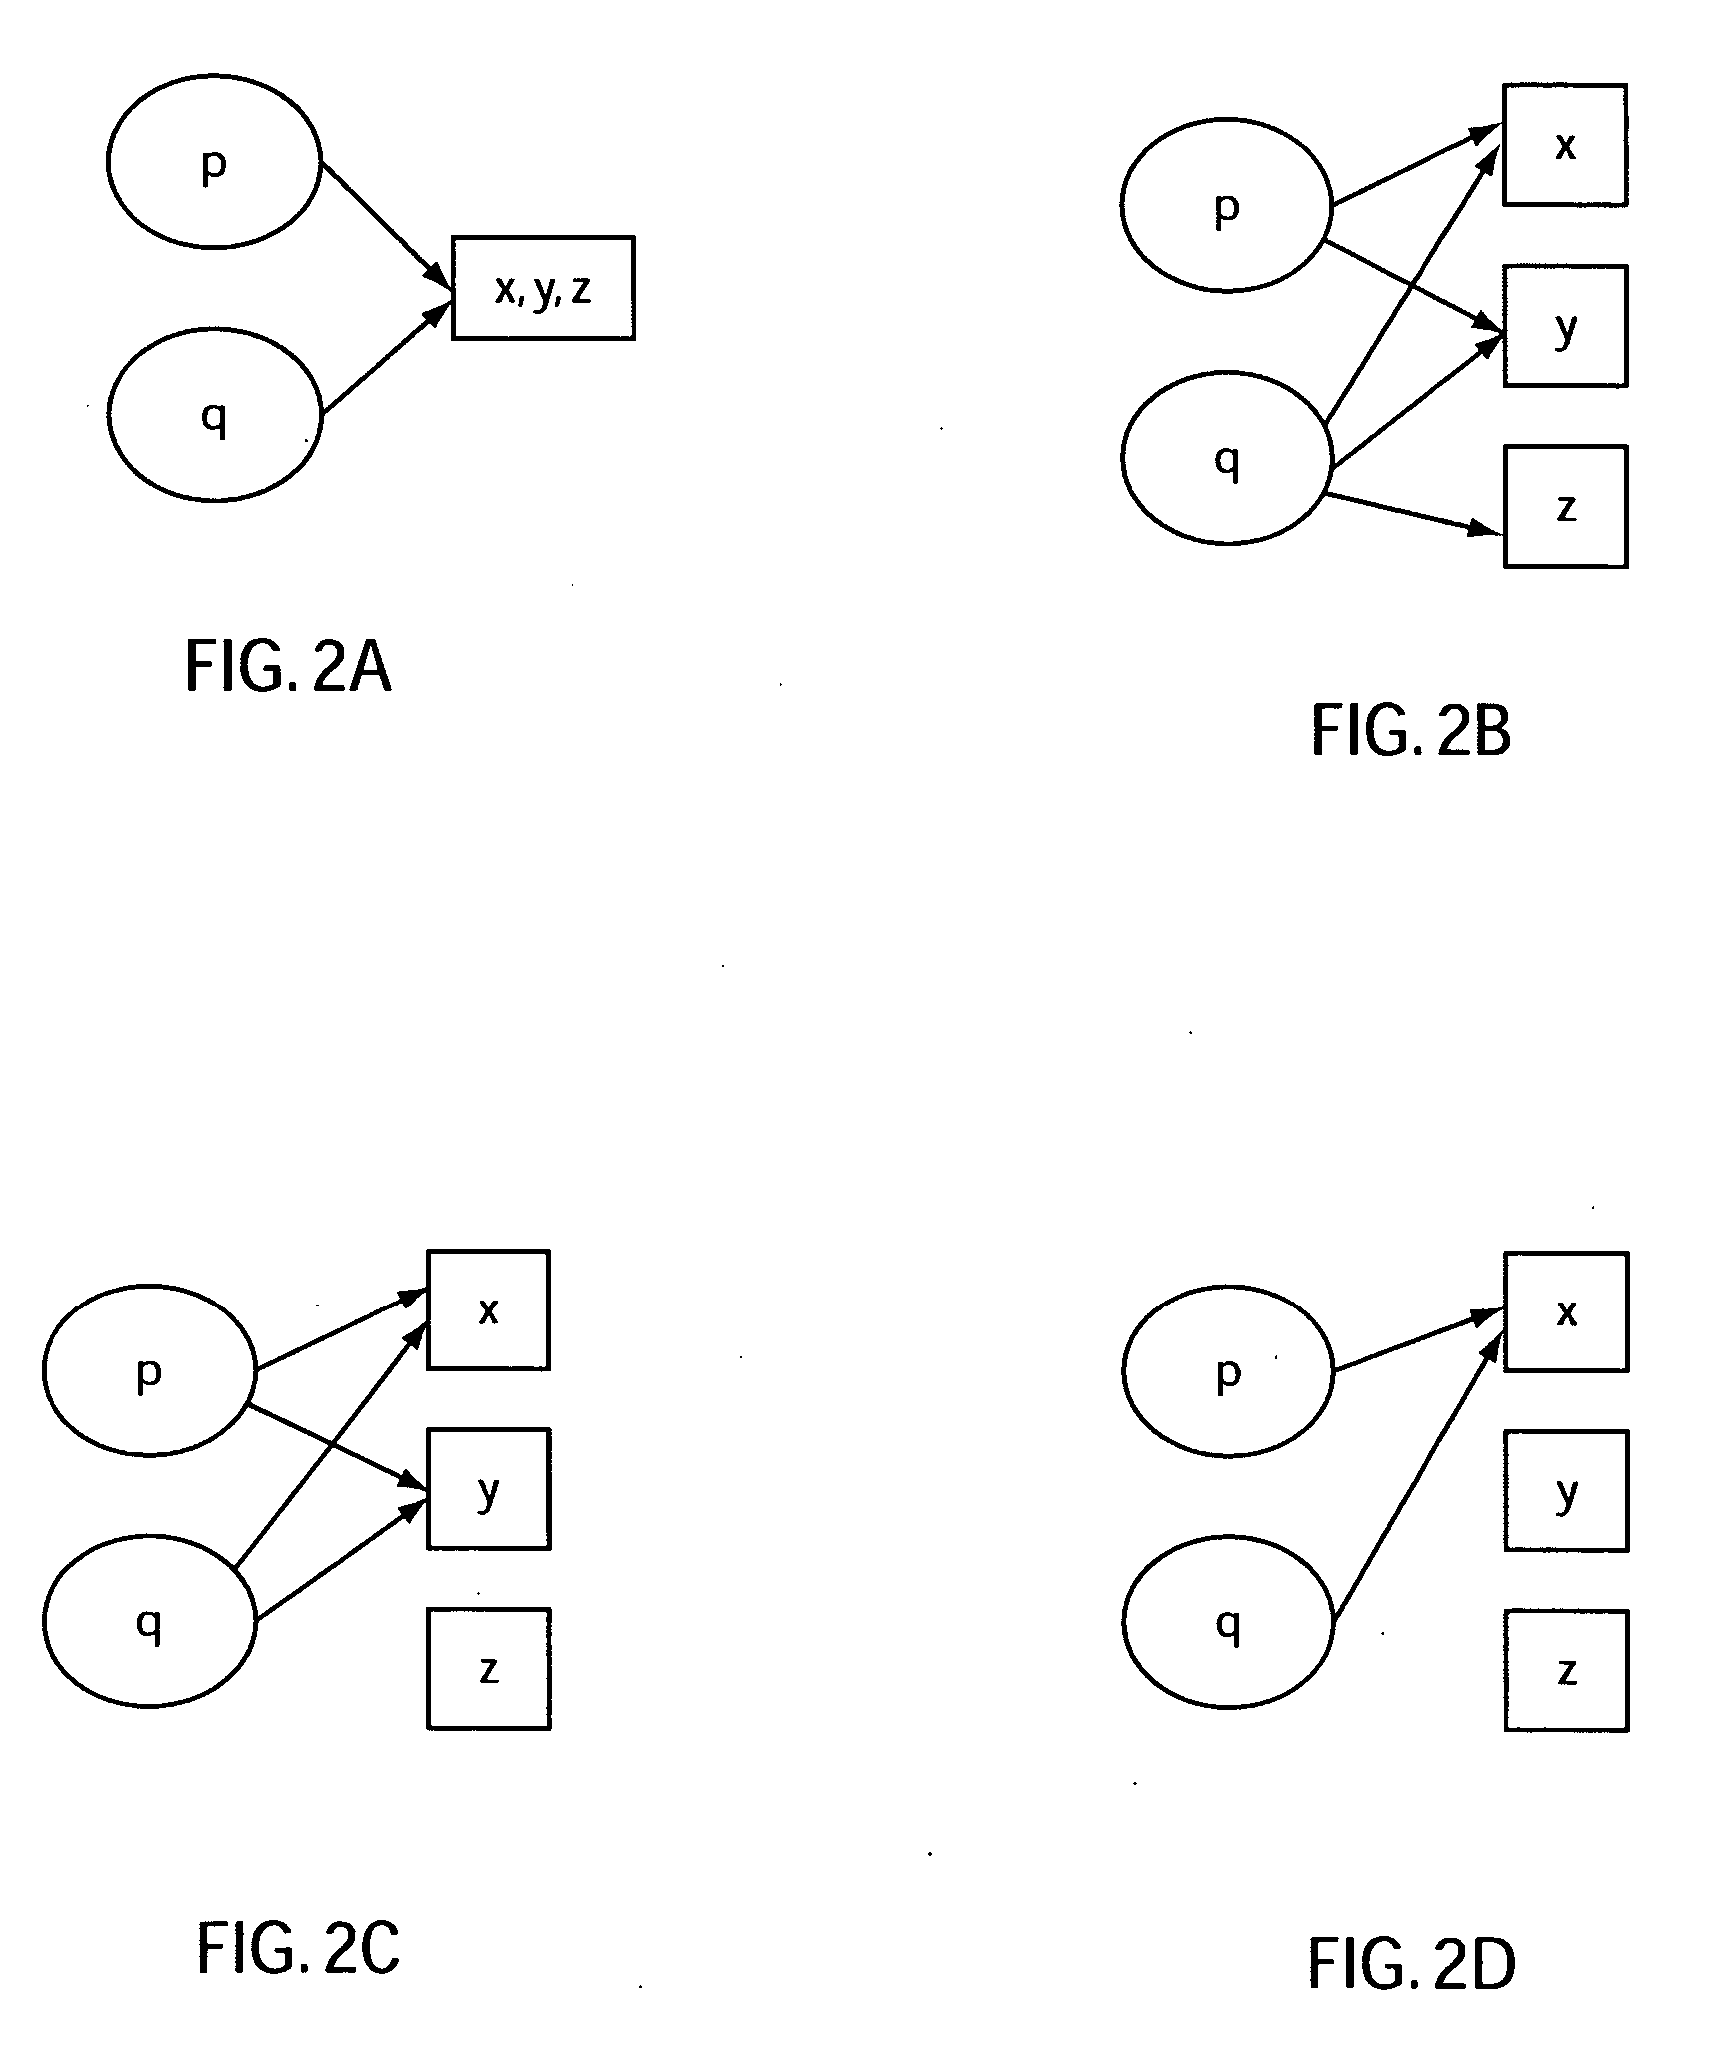 System and method for static analysis using fault paths